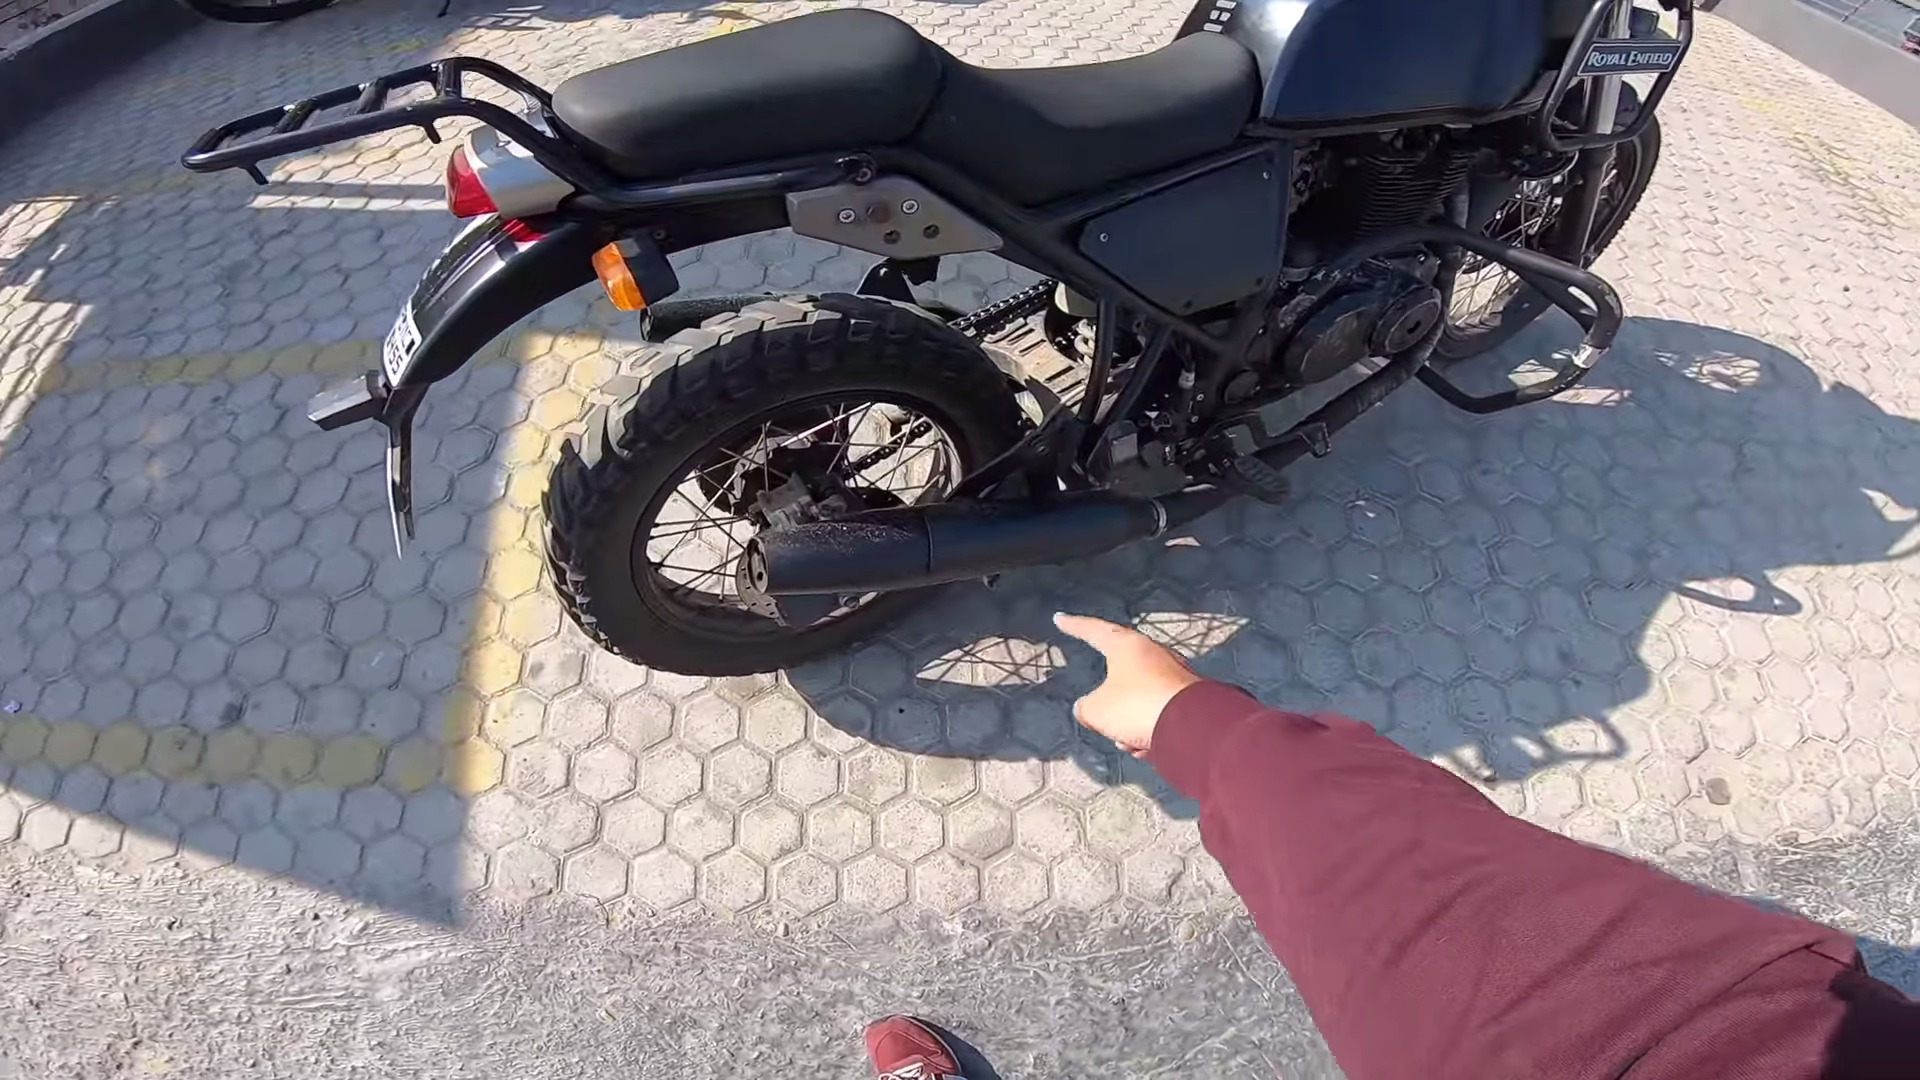 400cc 2-Cylinder Royal Enfield Himalayan Details and Video - bottom